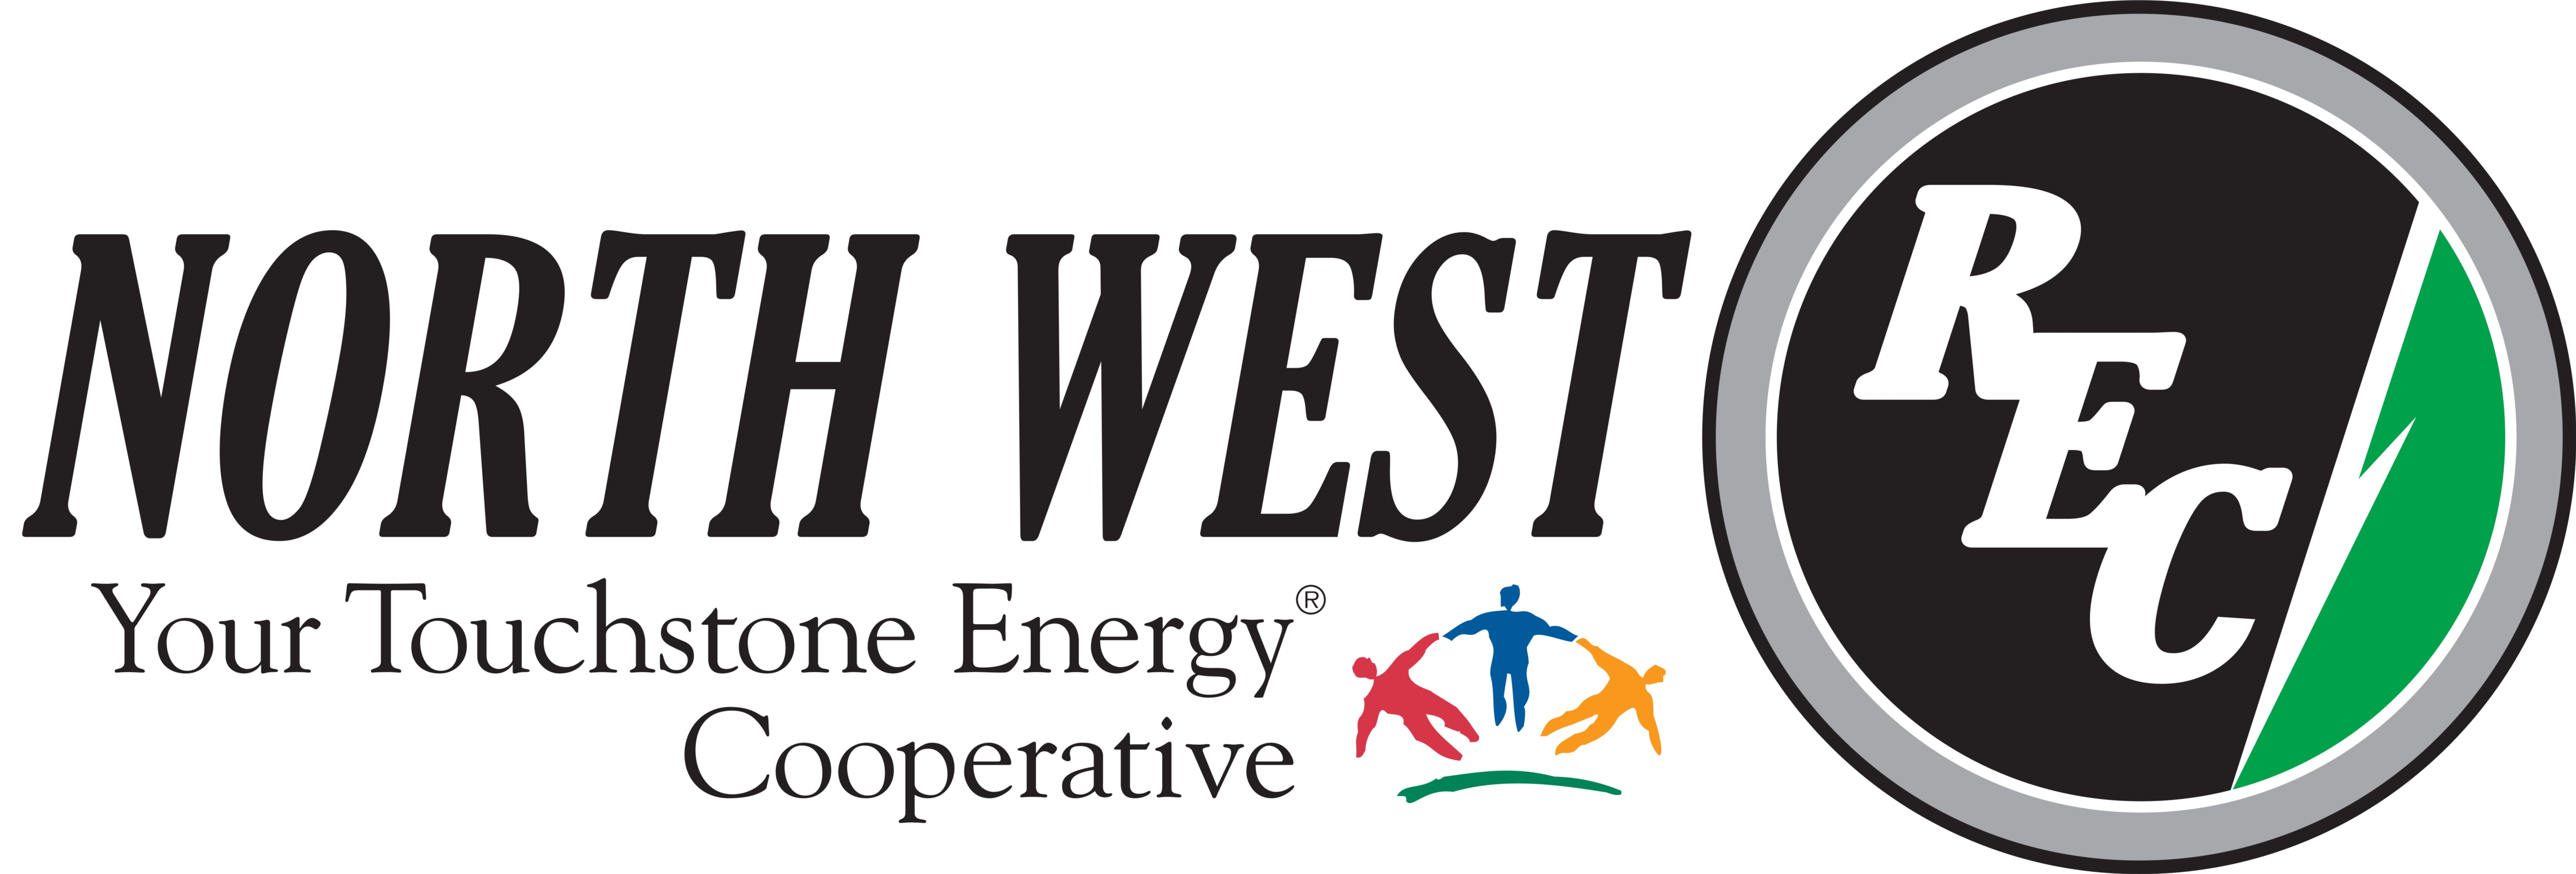 North West Rural Electric Cooperative Company Logo